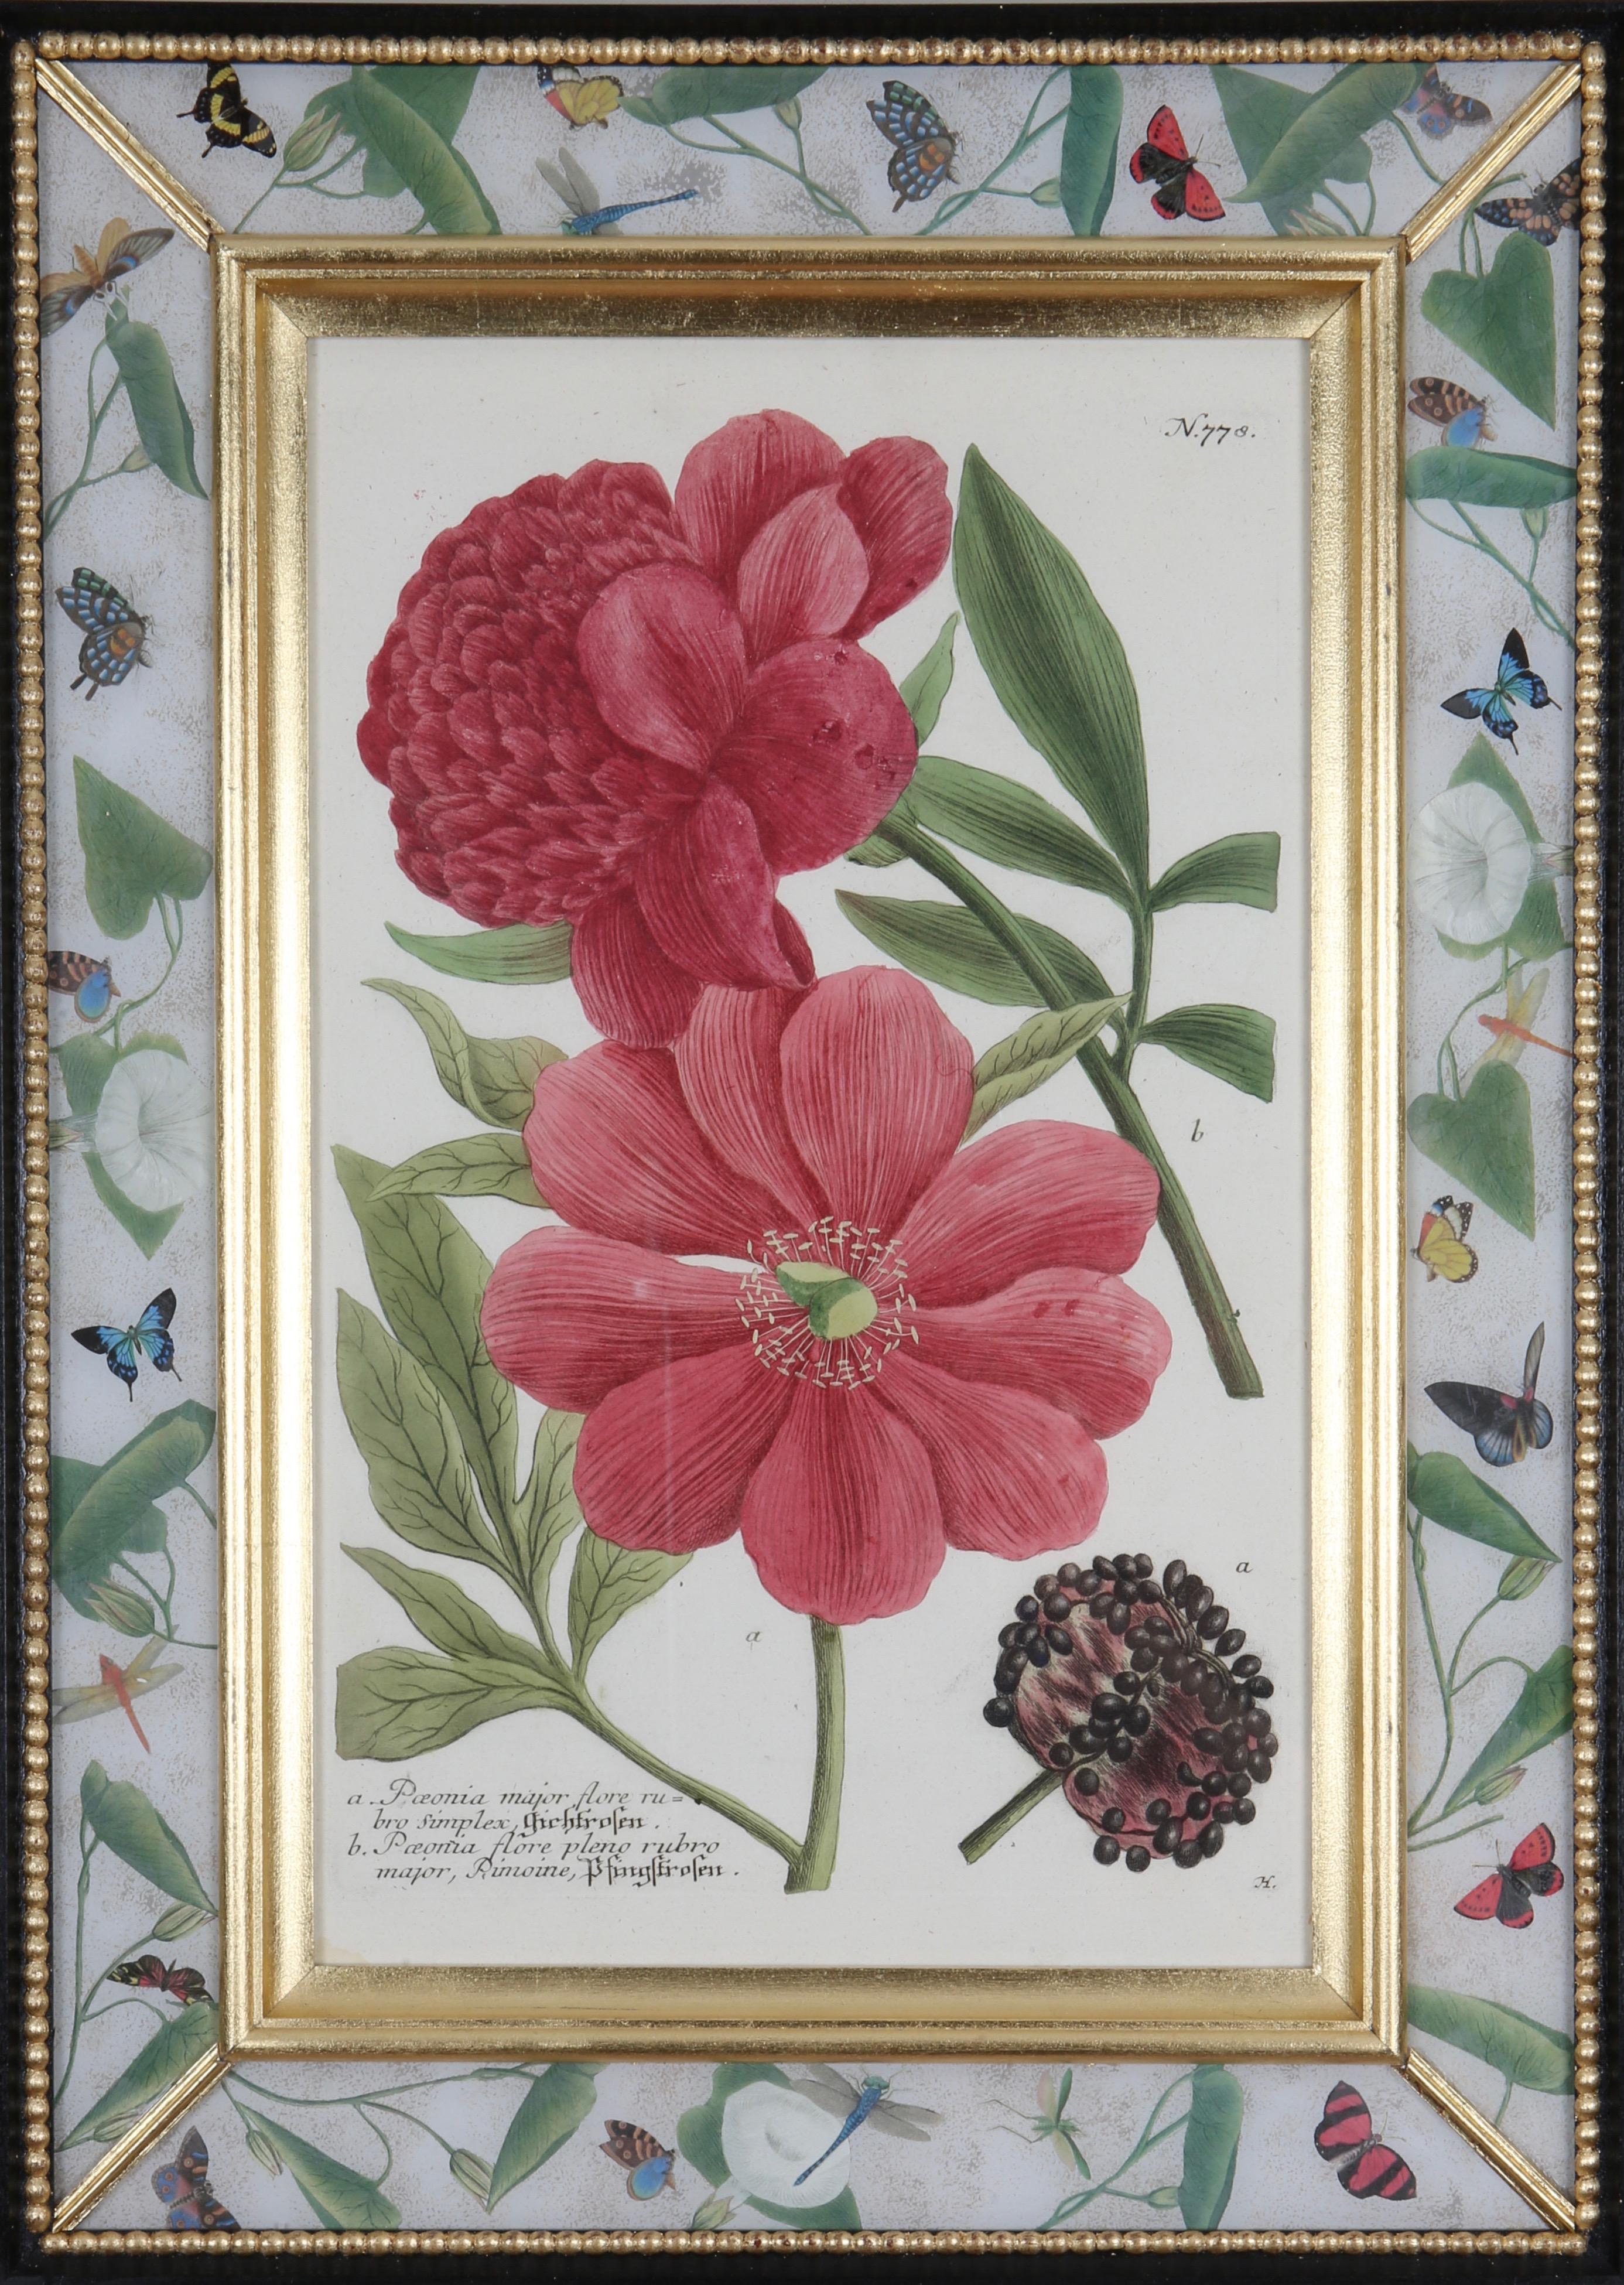 A wonderful selection of poppies, peonies and carnations , hand-coloured mezzotint engravings from: 